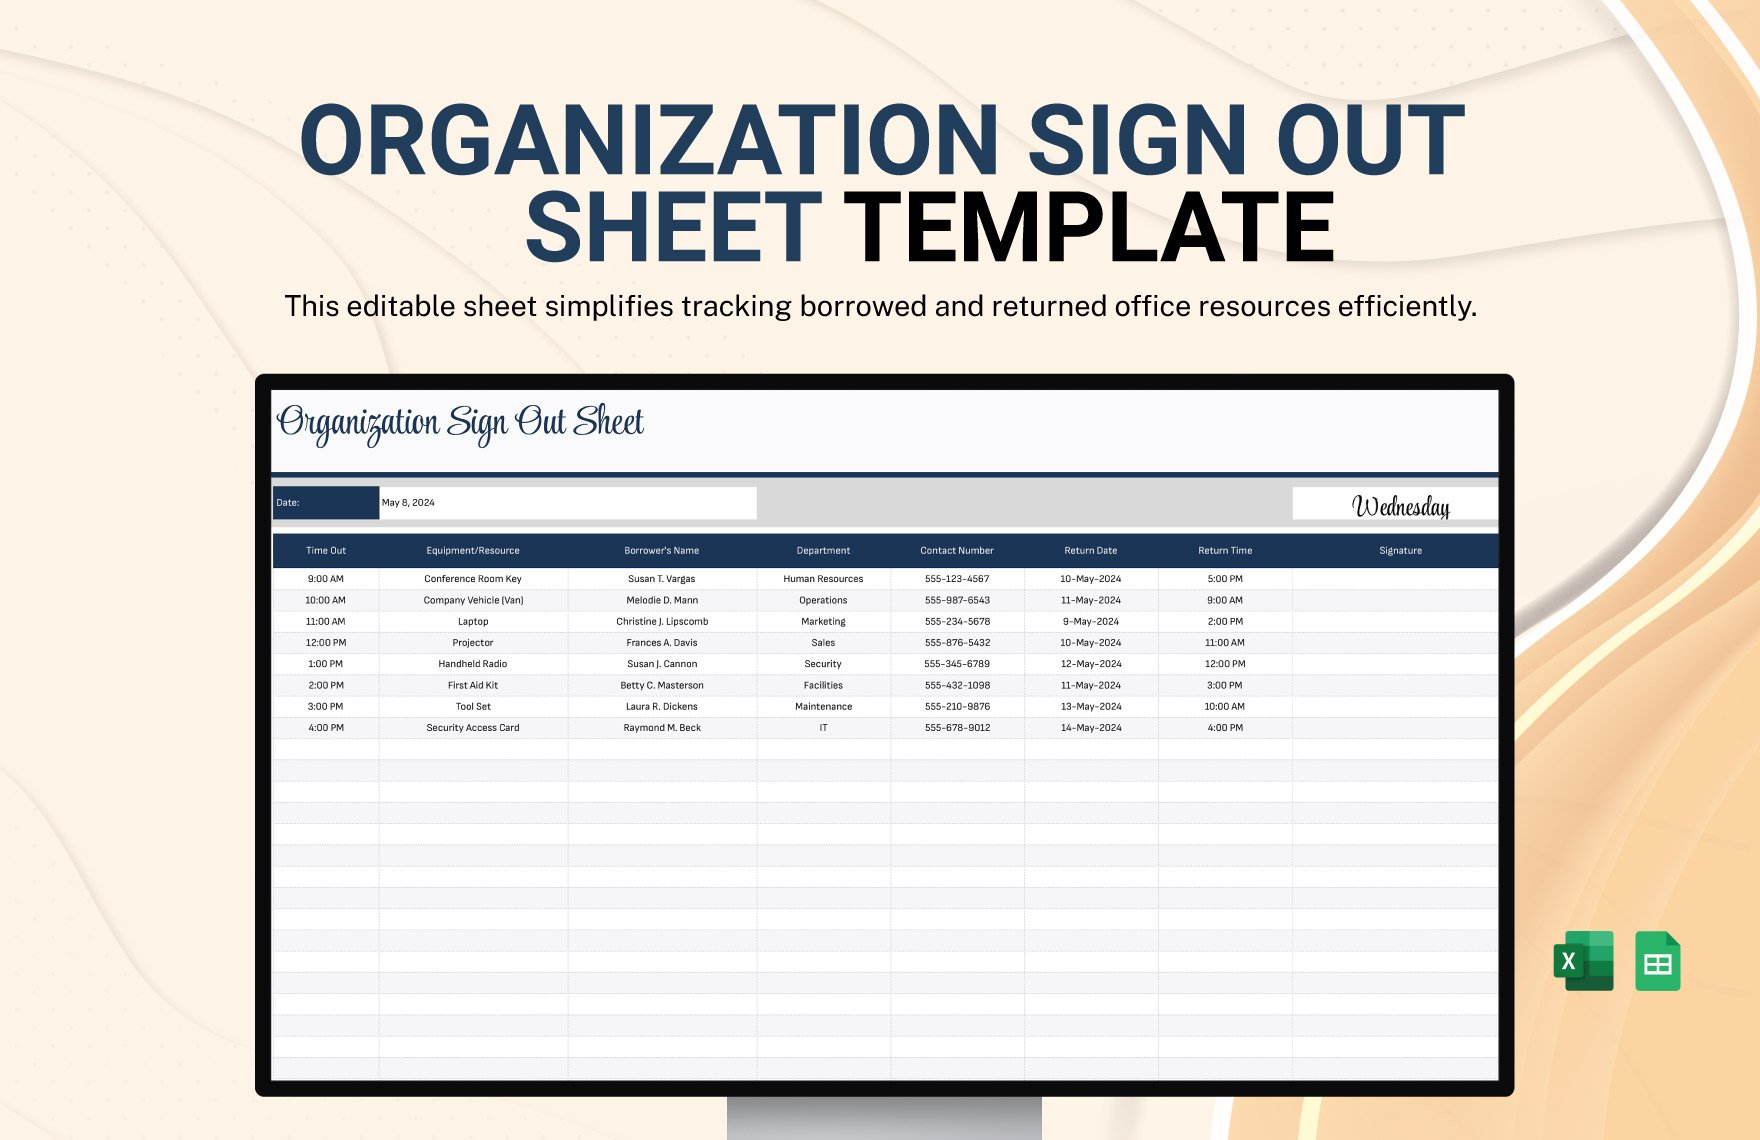 Organization Sign Out Sheet Template